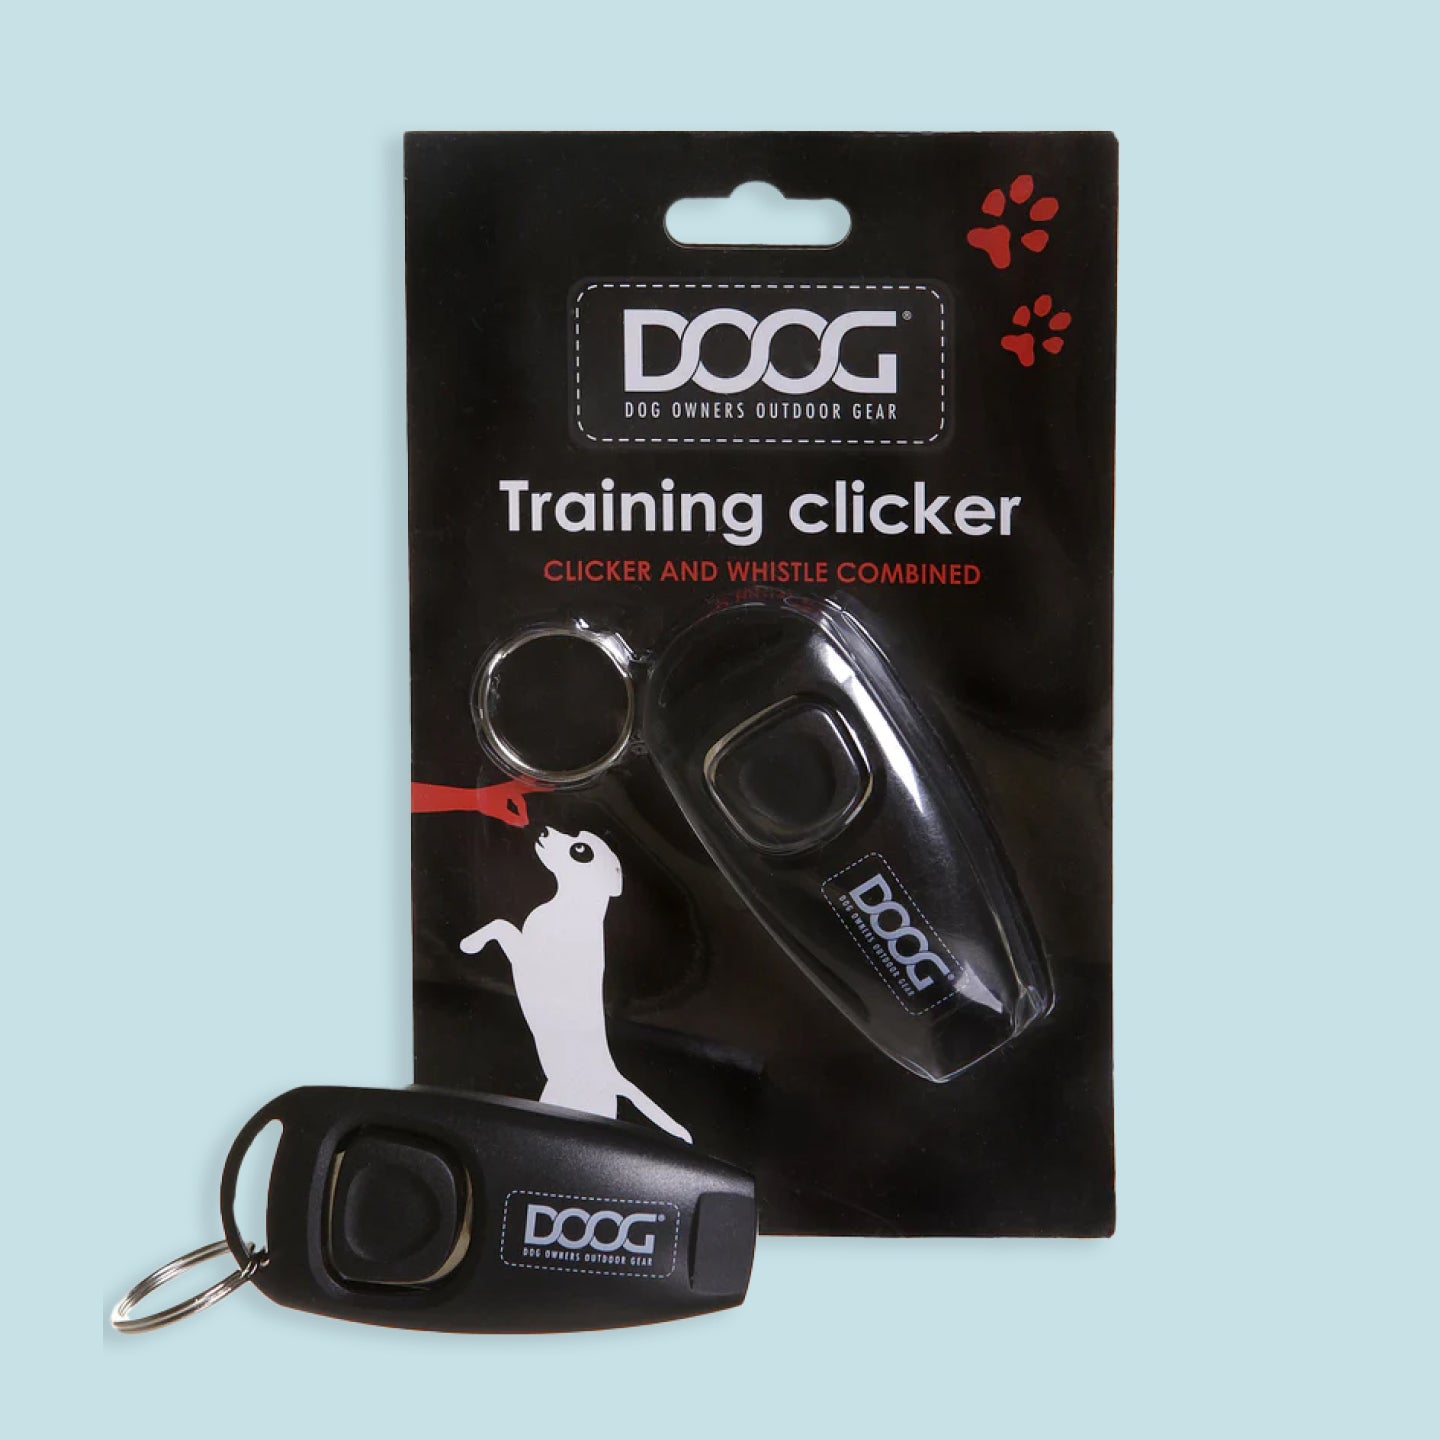 Training Clicker & Whistle